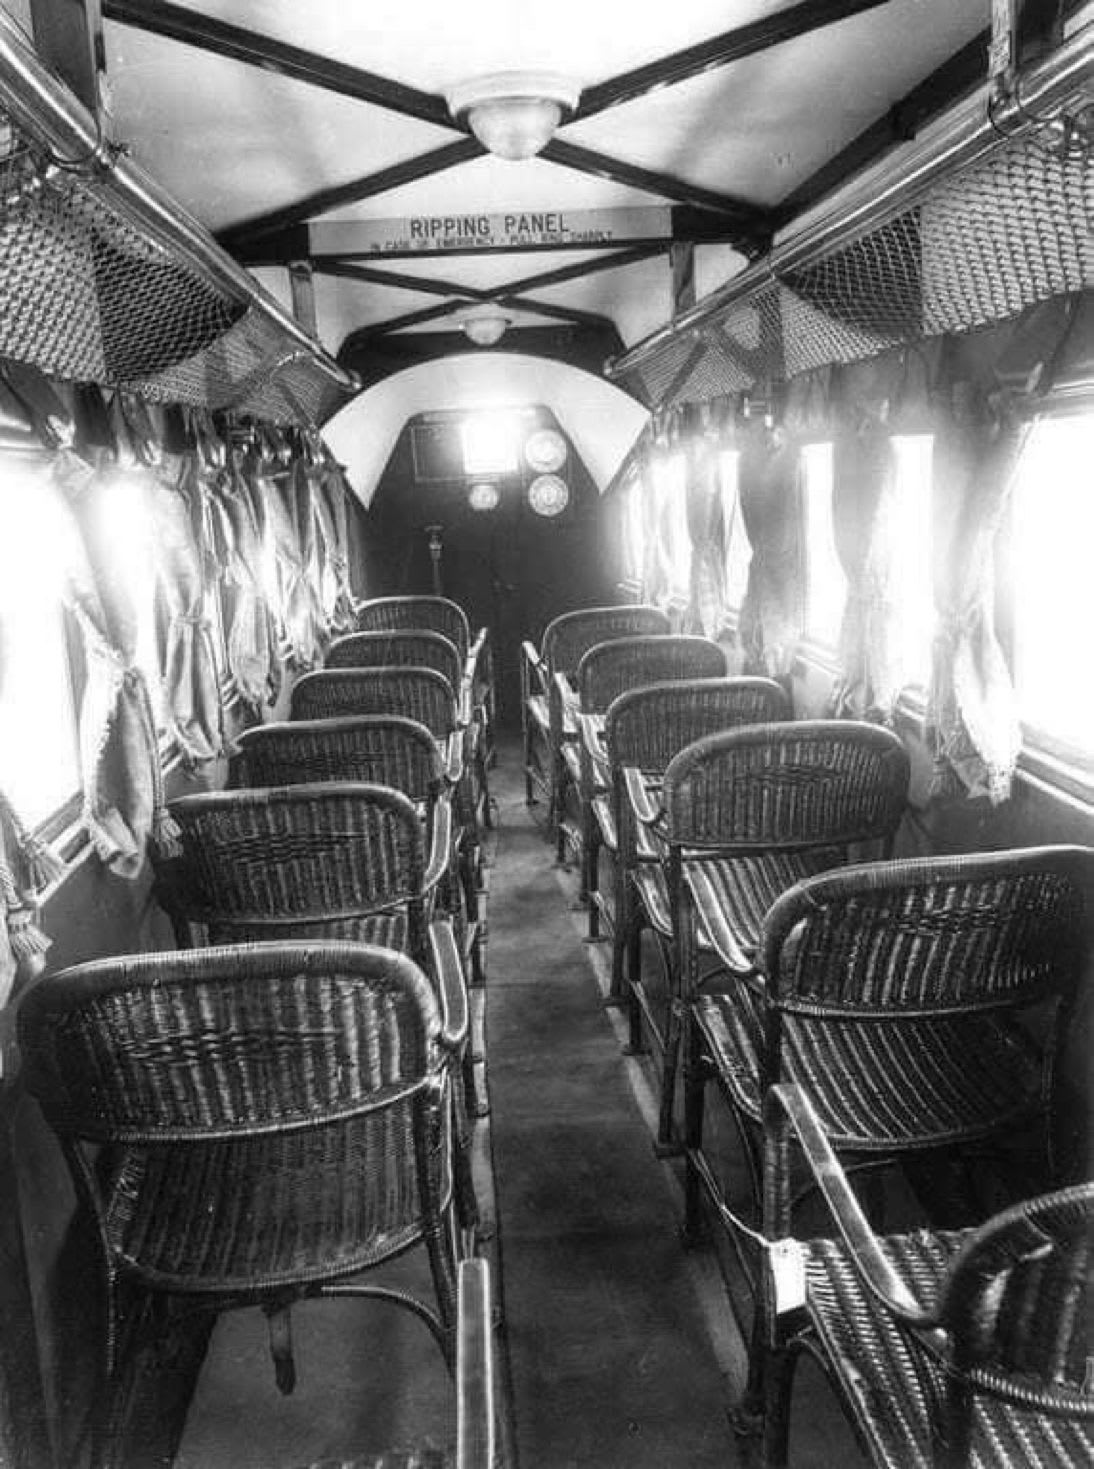 The interior of a commercial plane from Imperial Airways, the first British commercial airline in 1936.